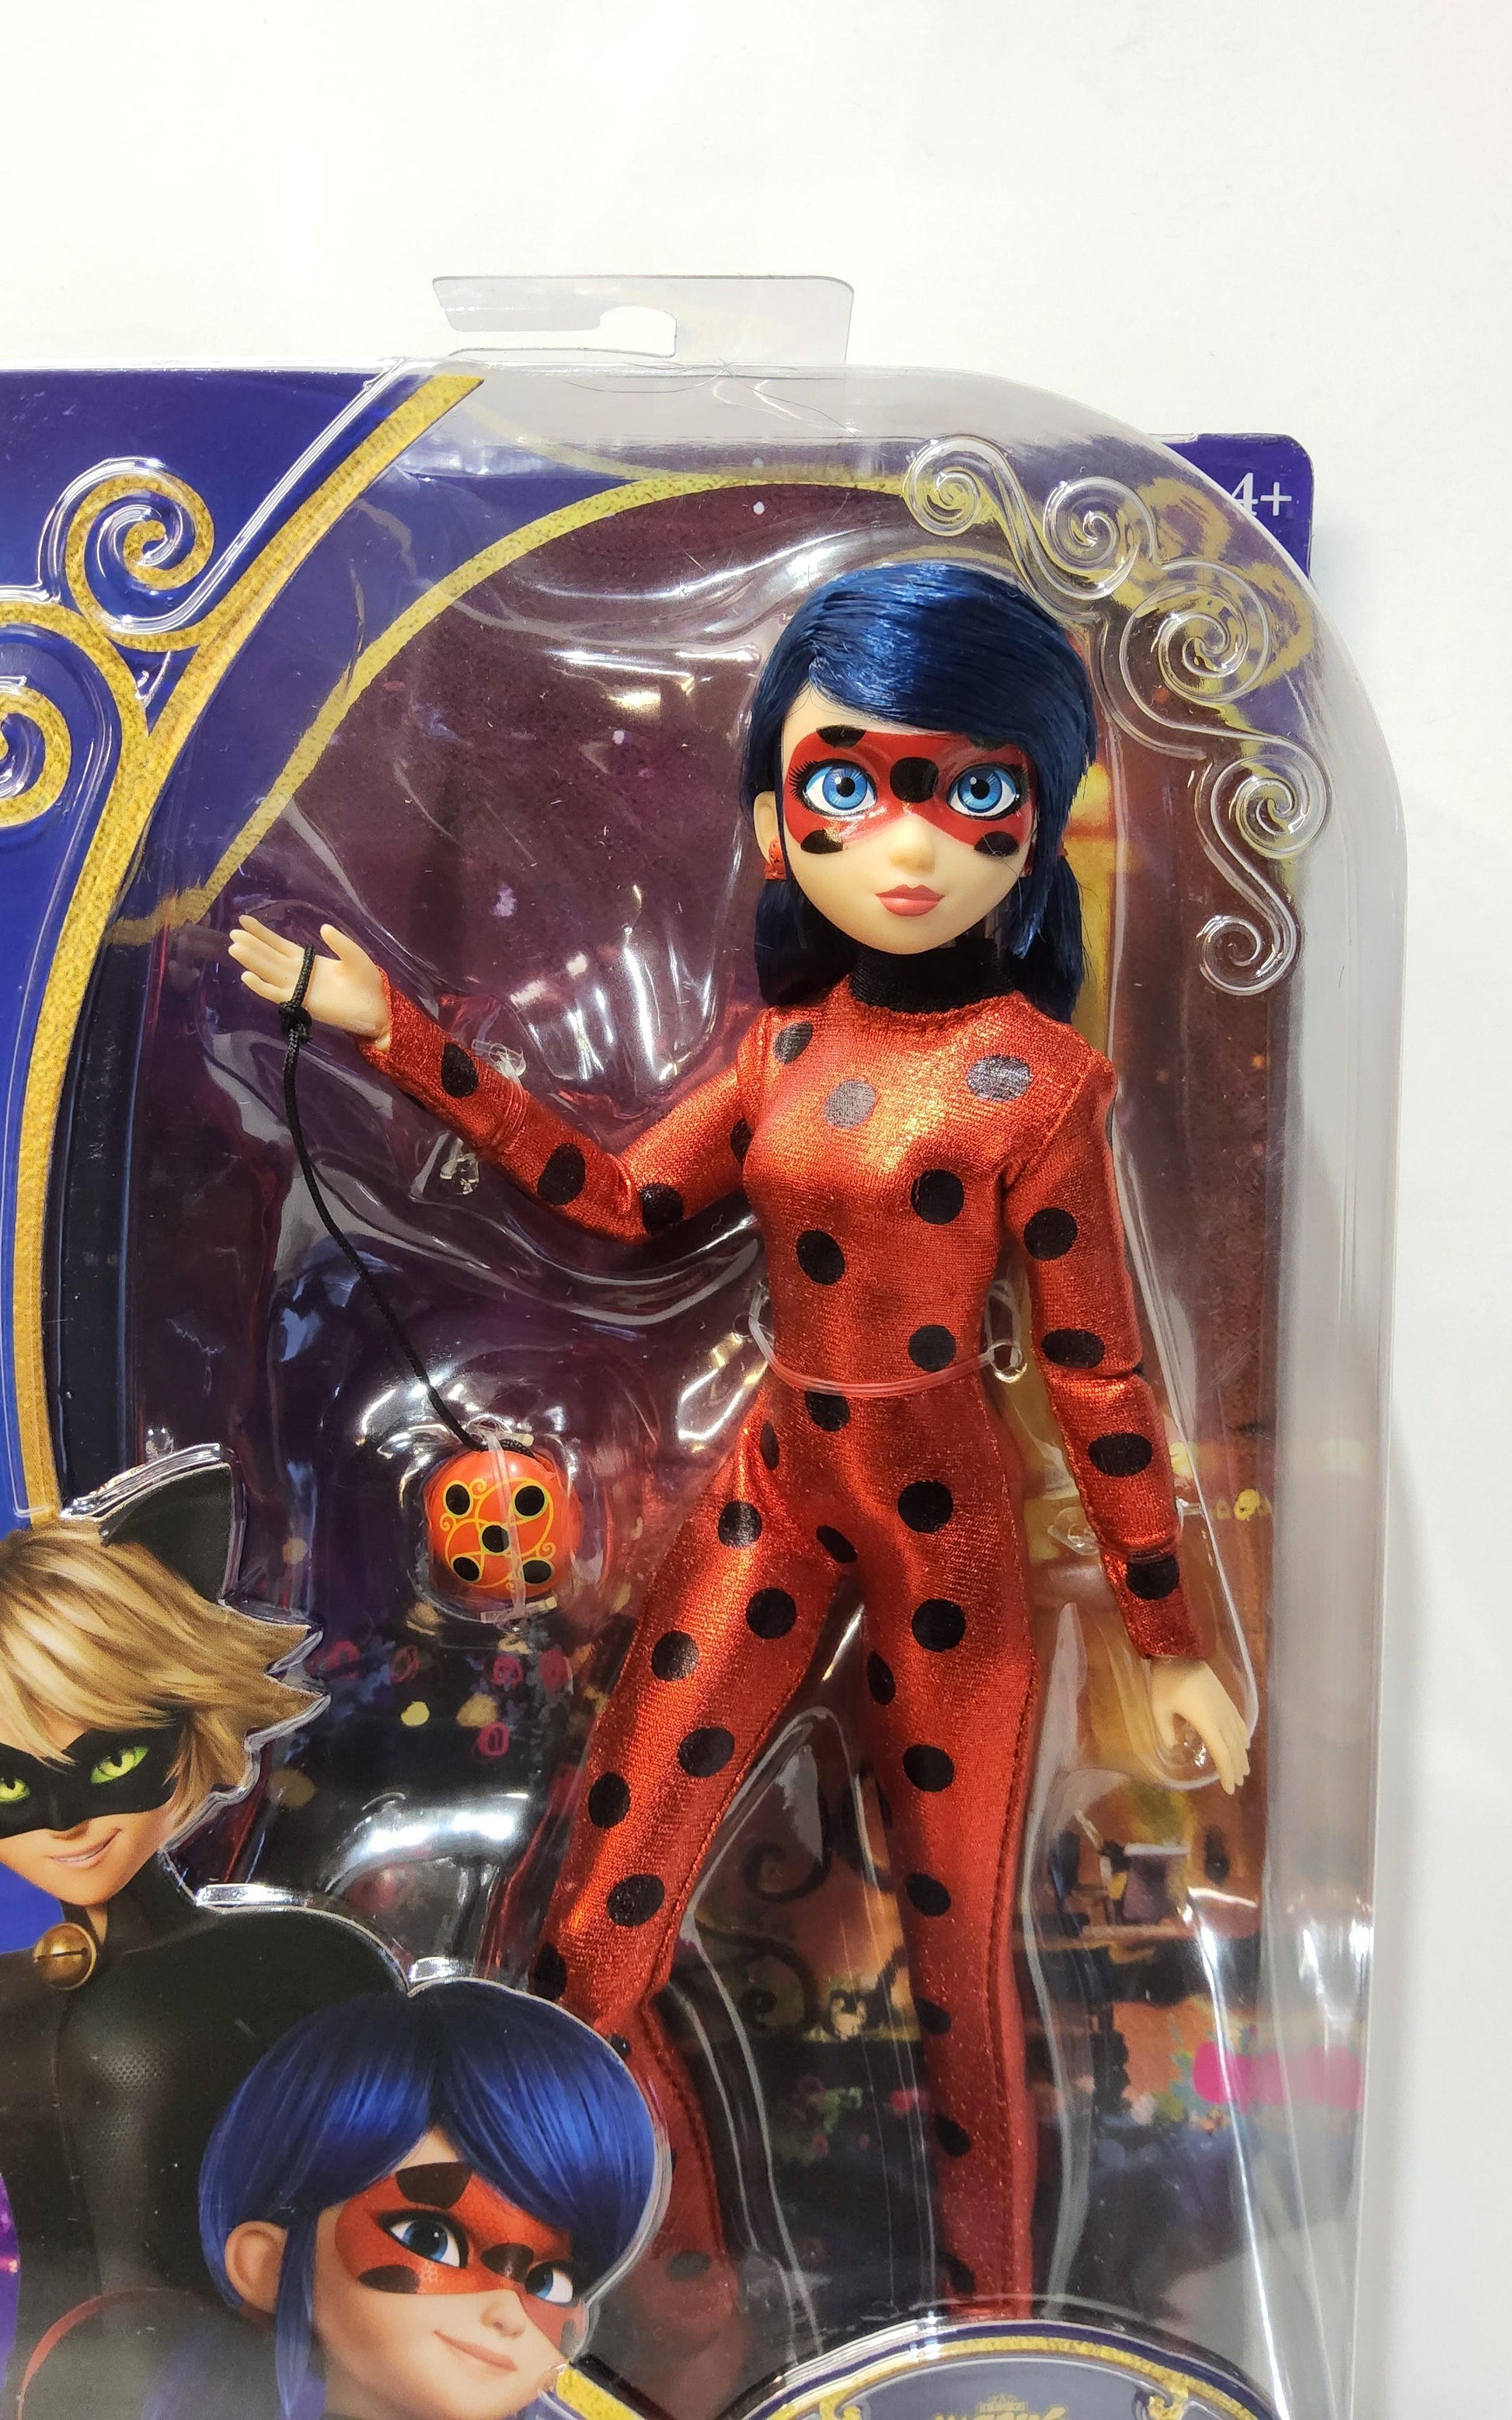 Miraculous Ladybug and Cat Noir play with Barbie baby doll. Play dolls &  Ladybug toys. New episodes. 